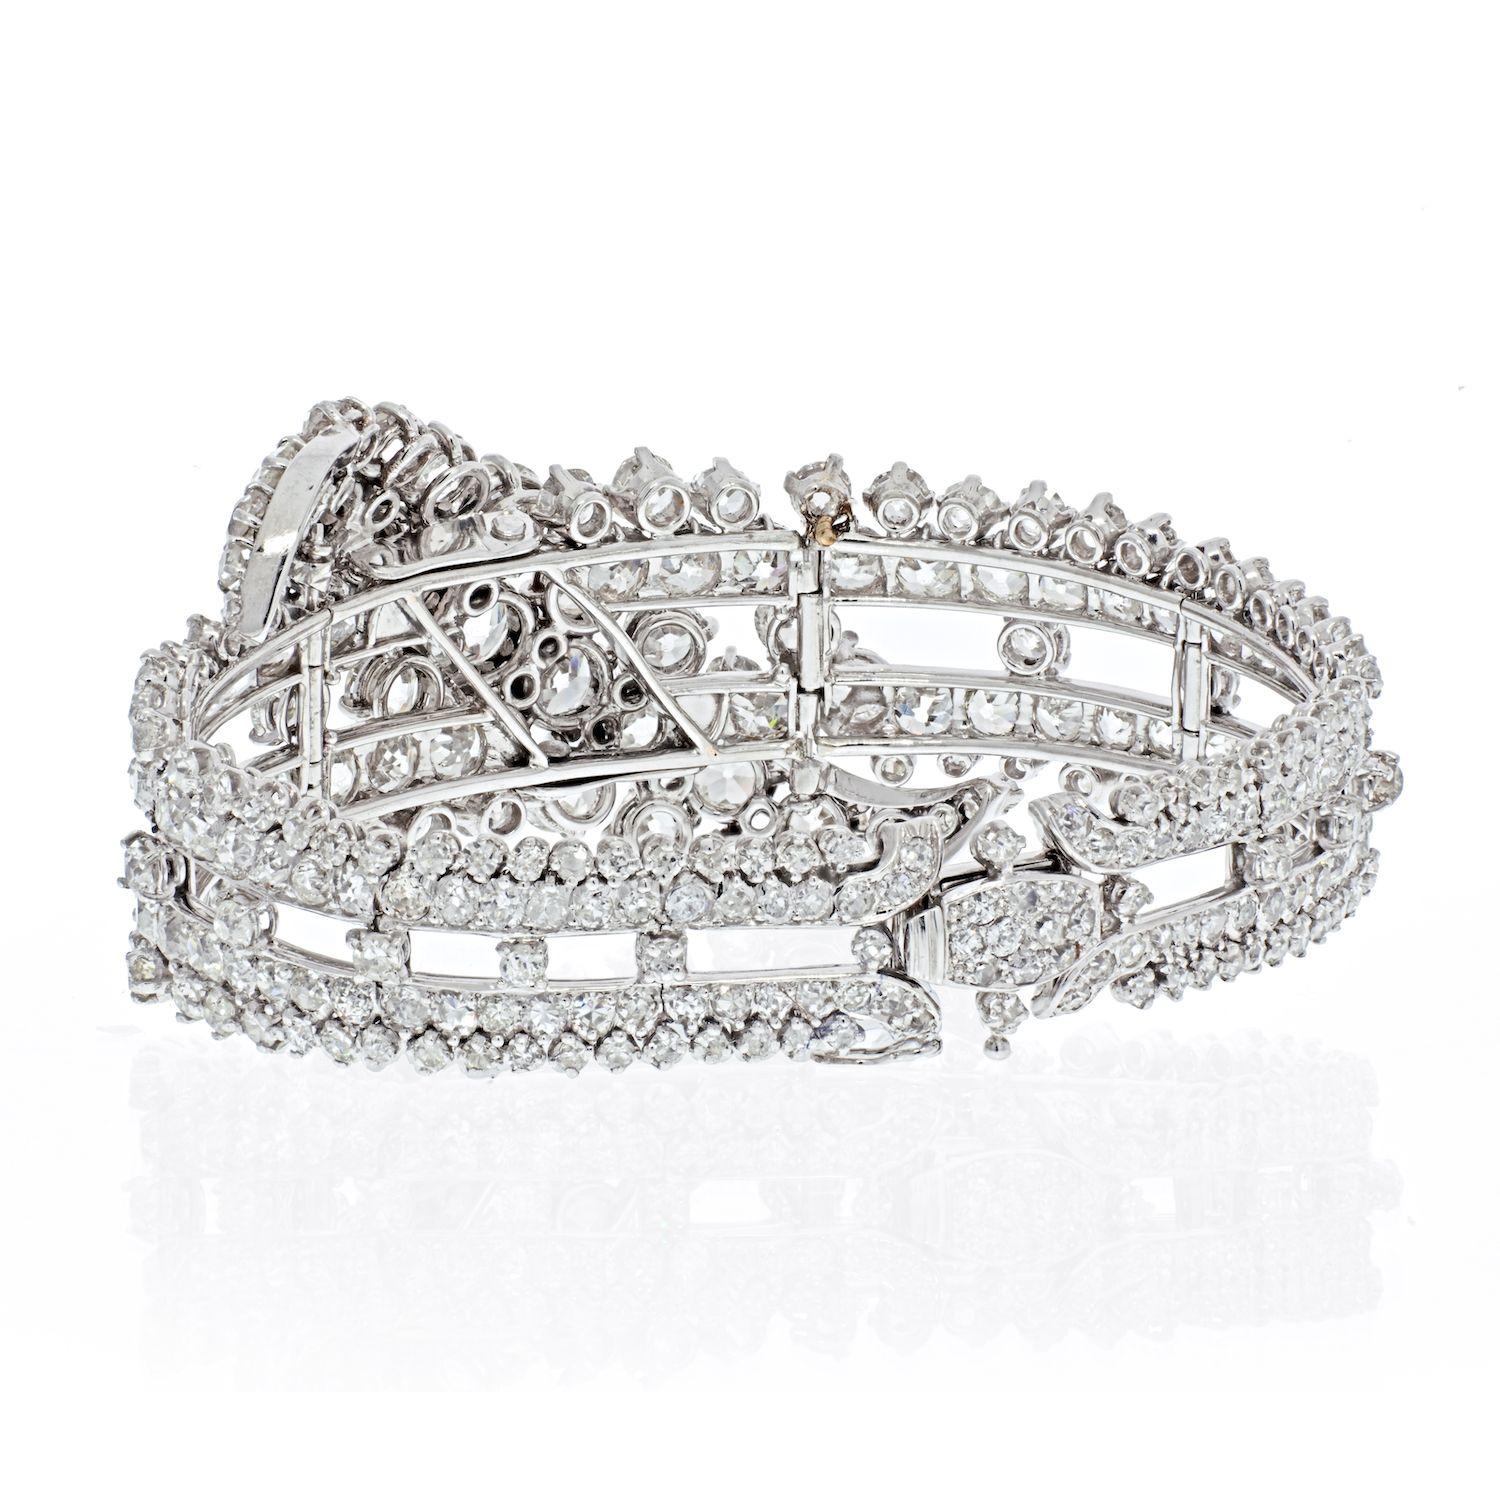 27 Carat Old Mine Cut Diamond Bangle Bracelet In Excellent Condition For Sale In New York, NY